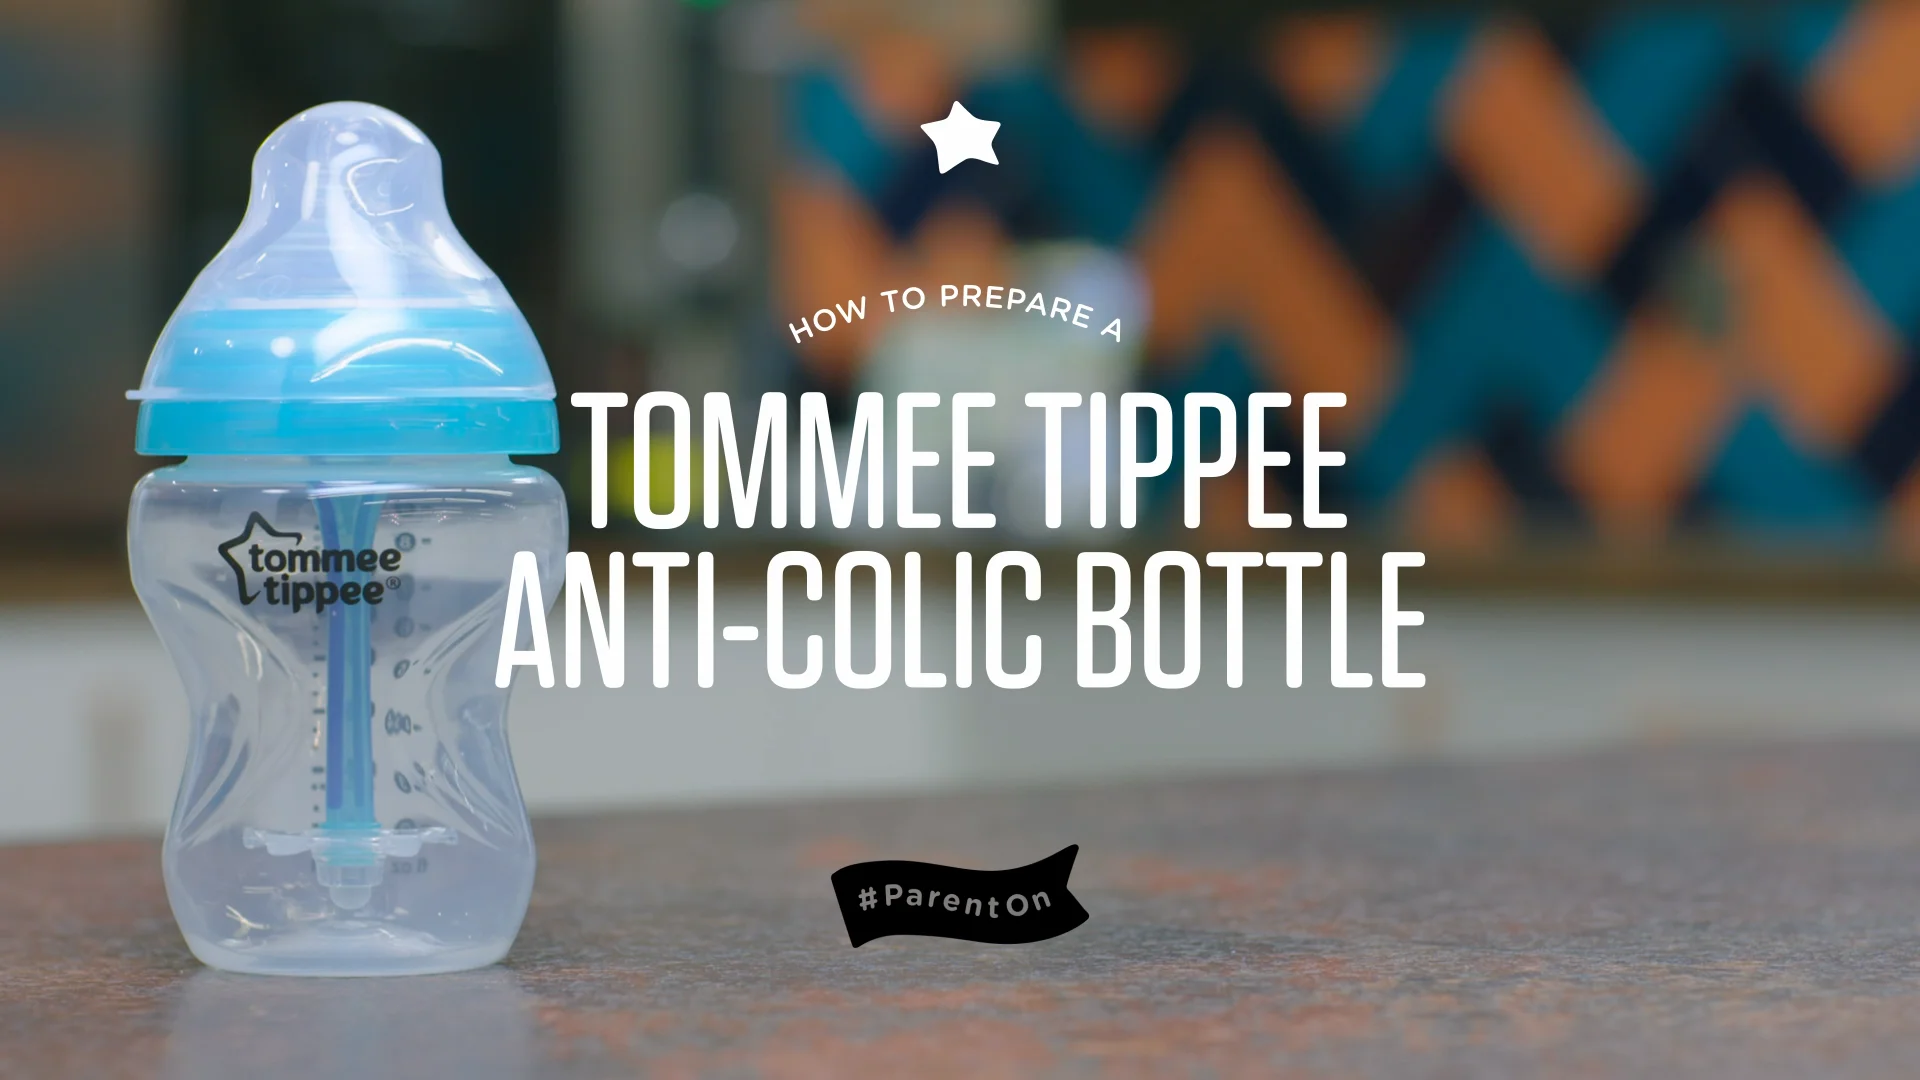 How to use Tommee Tippee Anti Colic Bottles on Vimeo